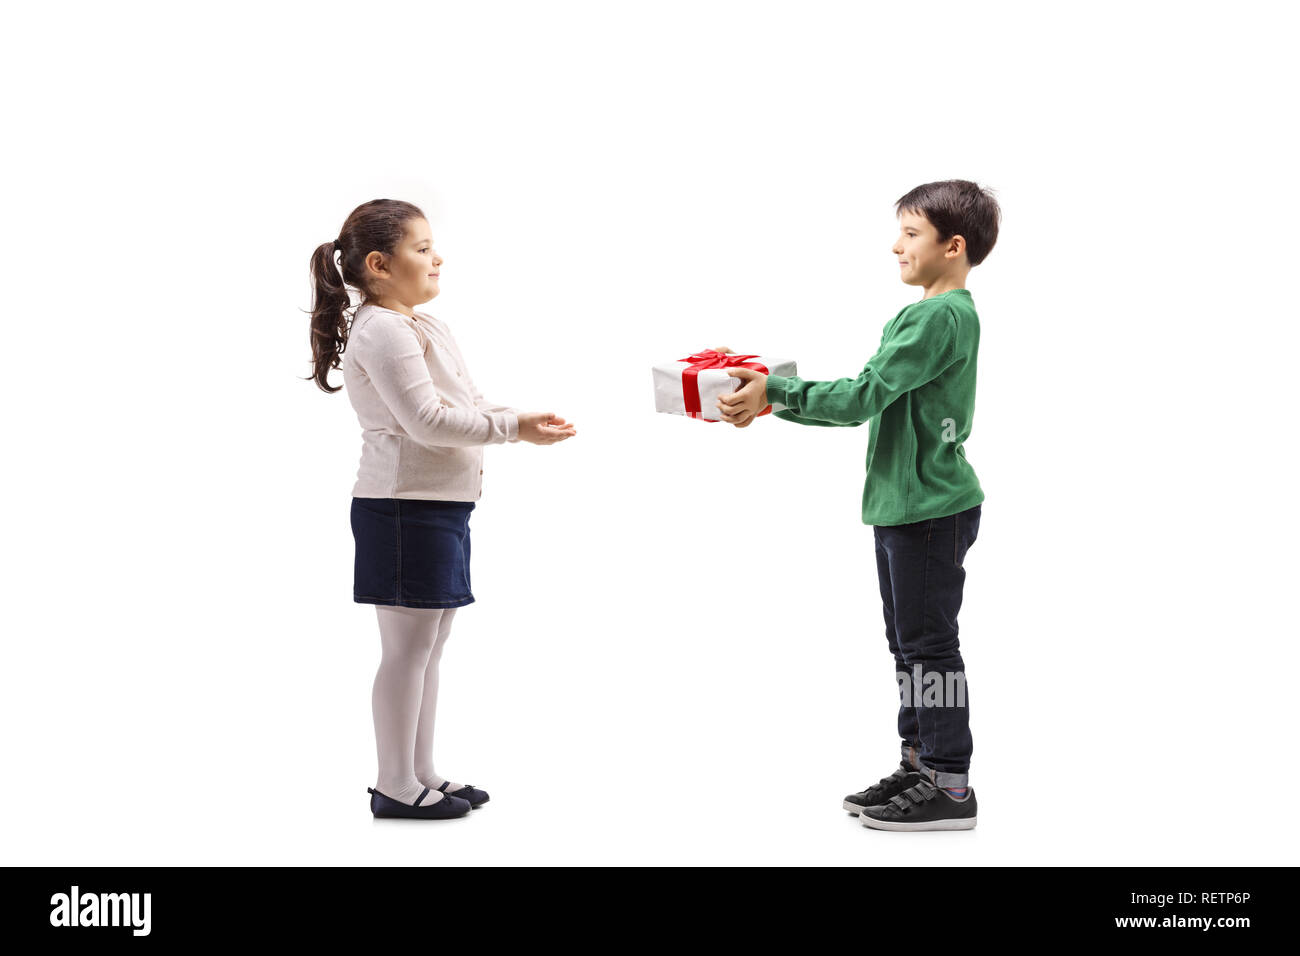 Full length profile shot of a little boy giving a present to a little girl isolated on white background Stock Photo